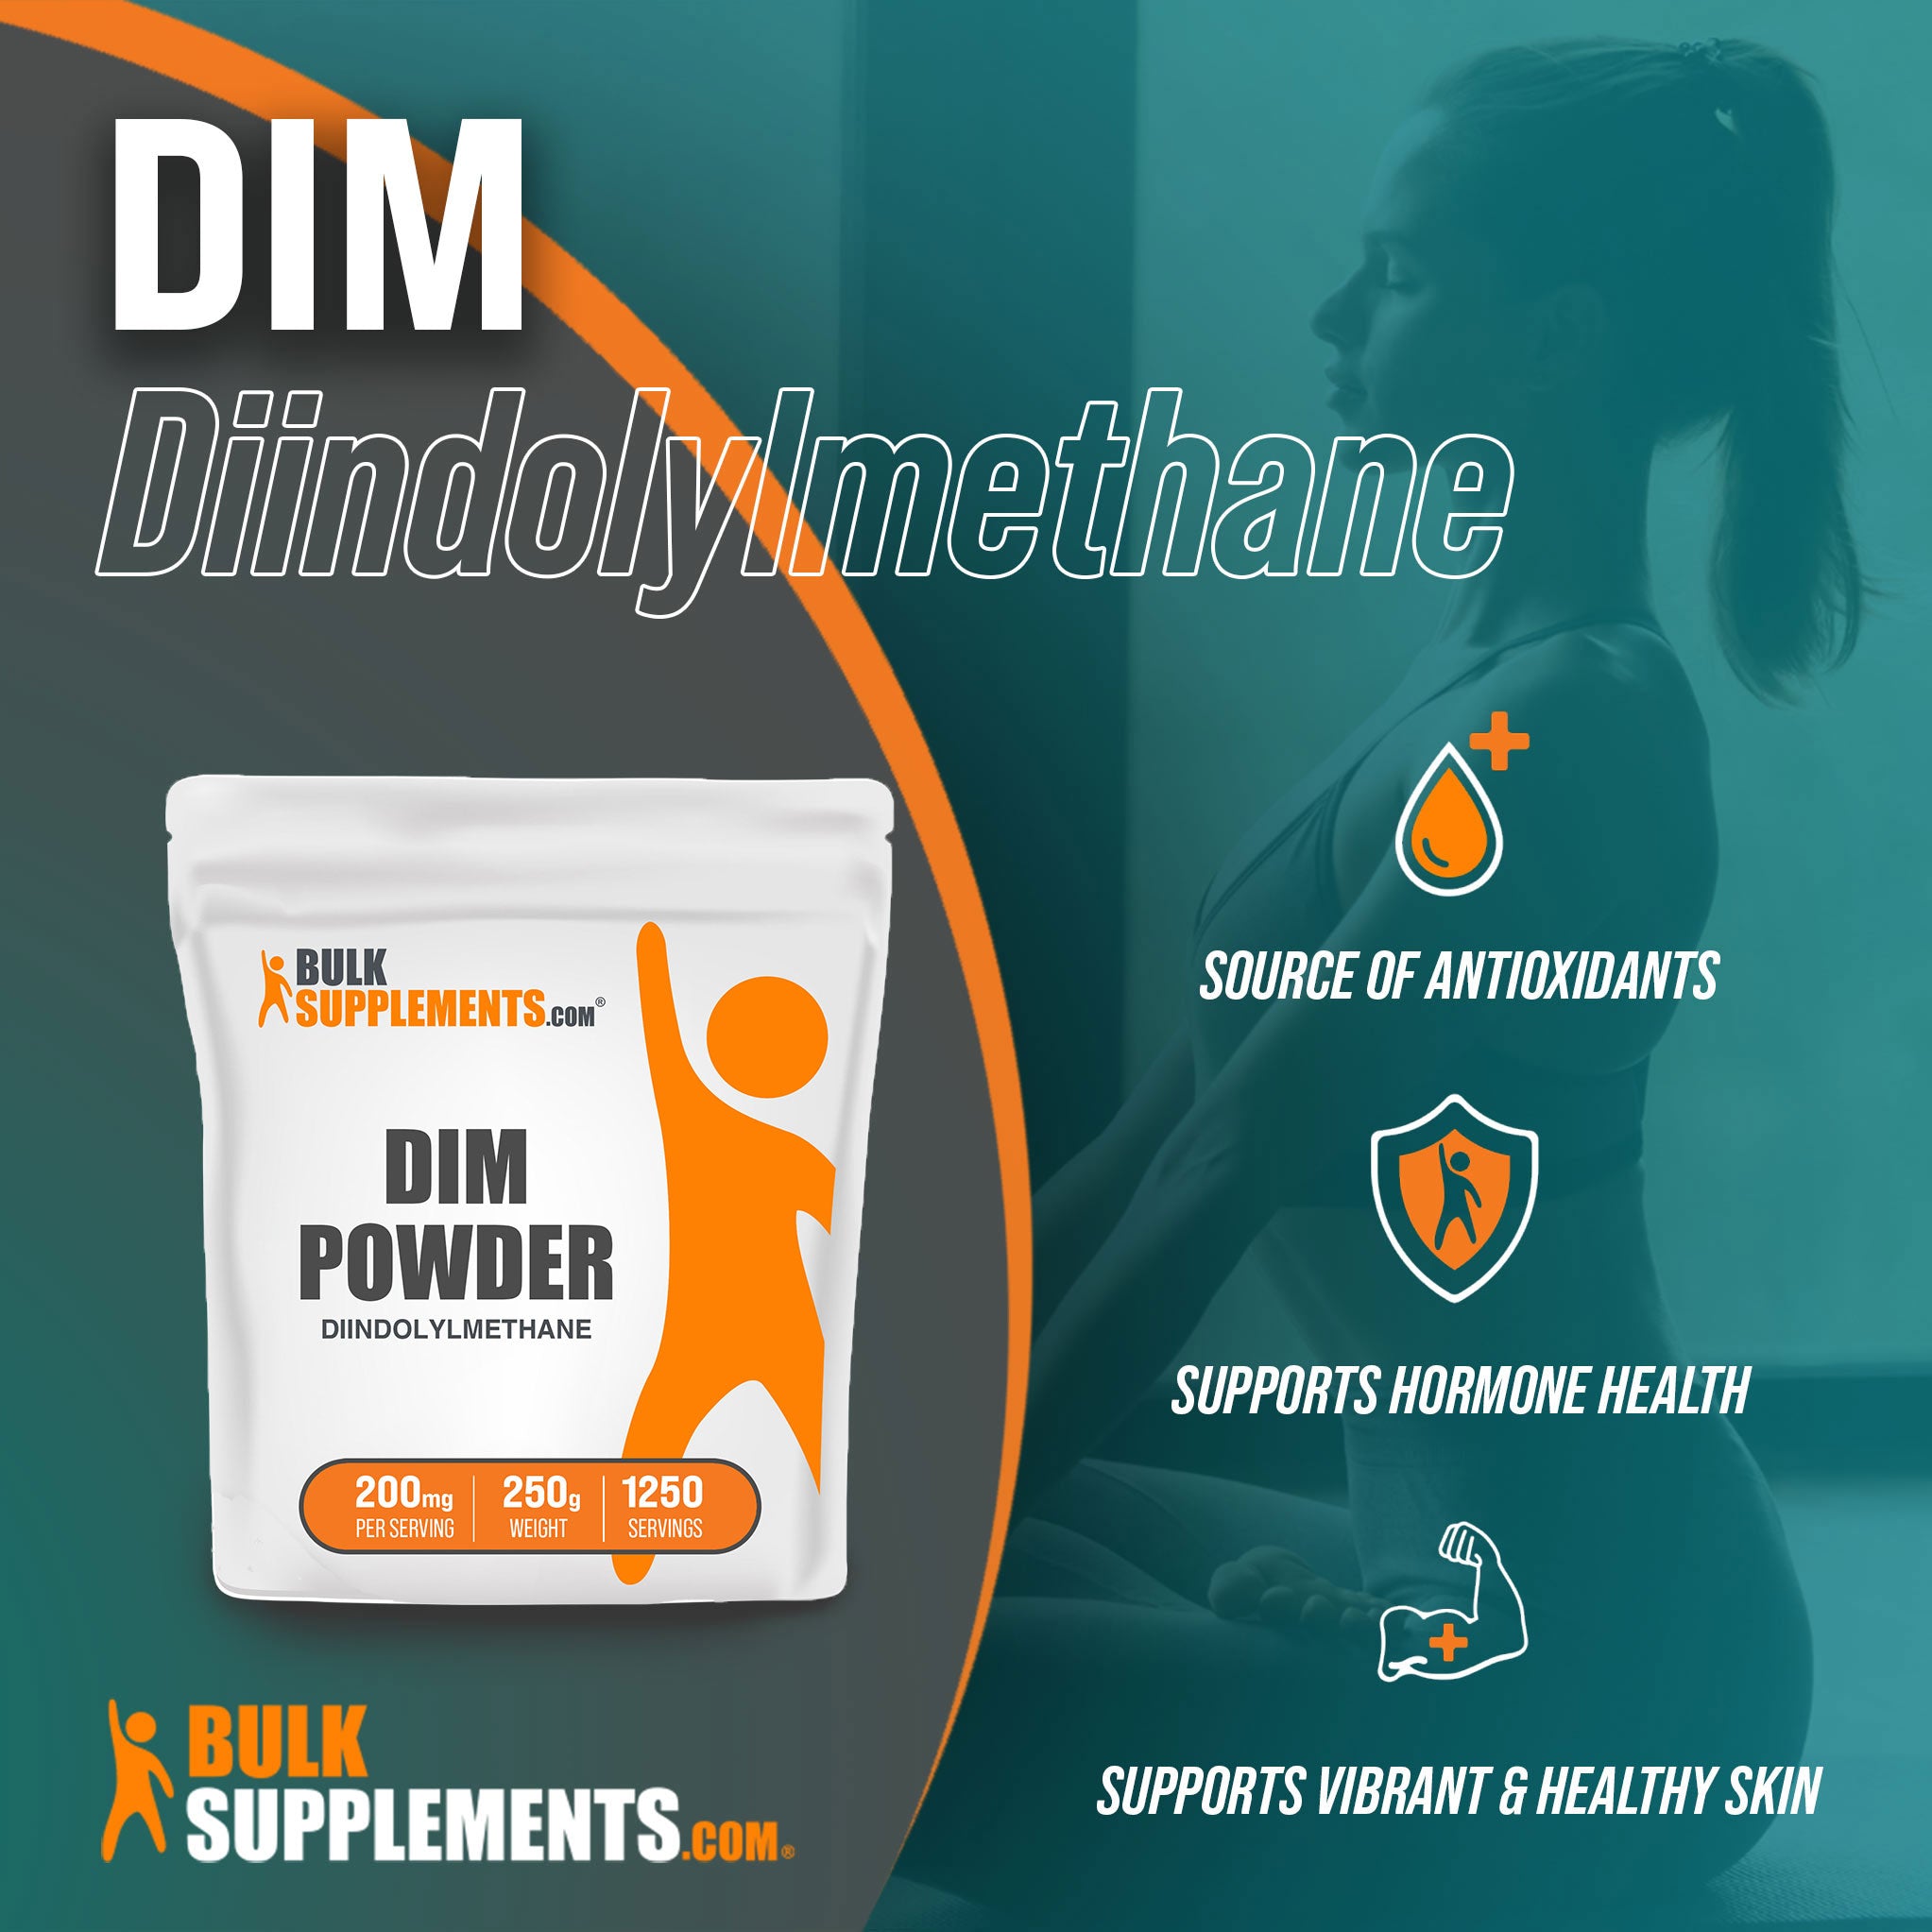 Benefits of DIM Diindolylmethane; source of antioxidants, supports hormone health, supports vibrant & healthy skin